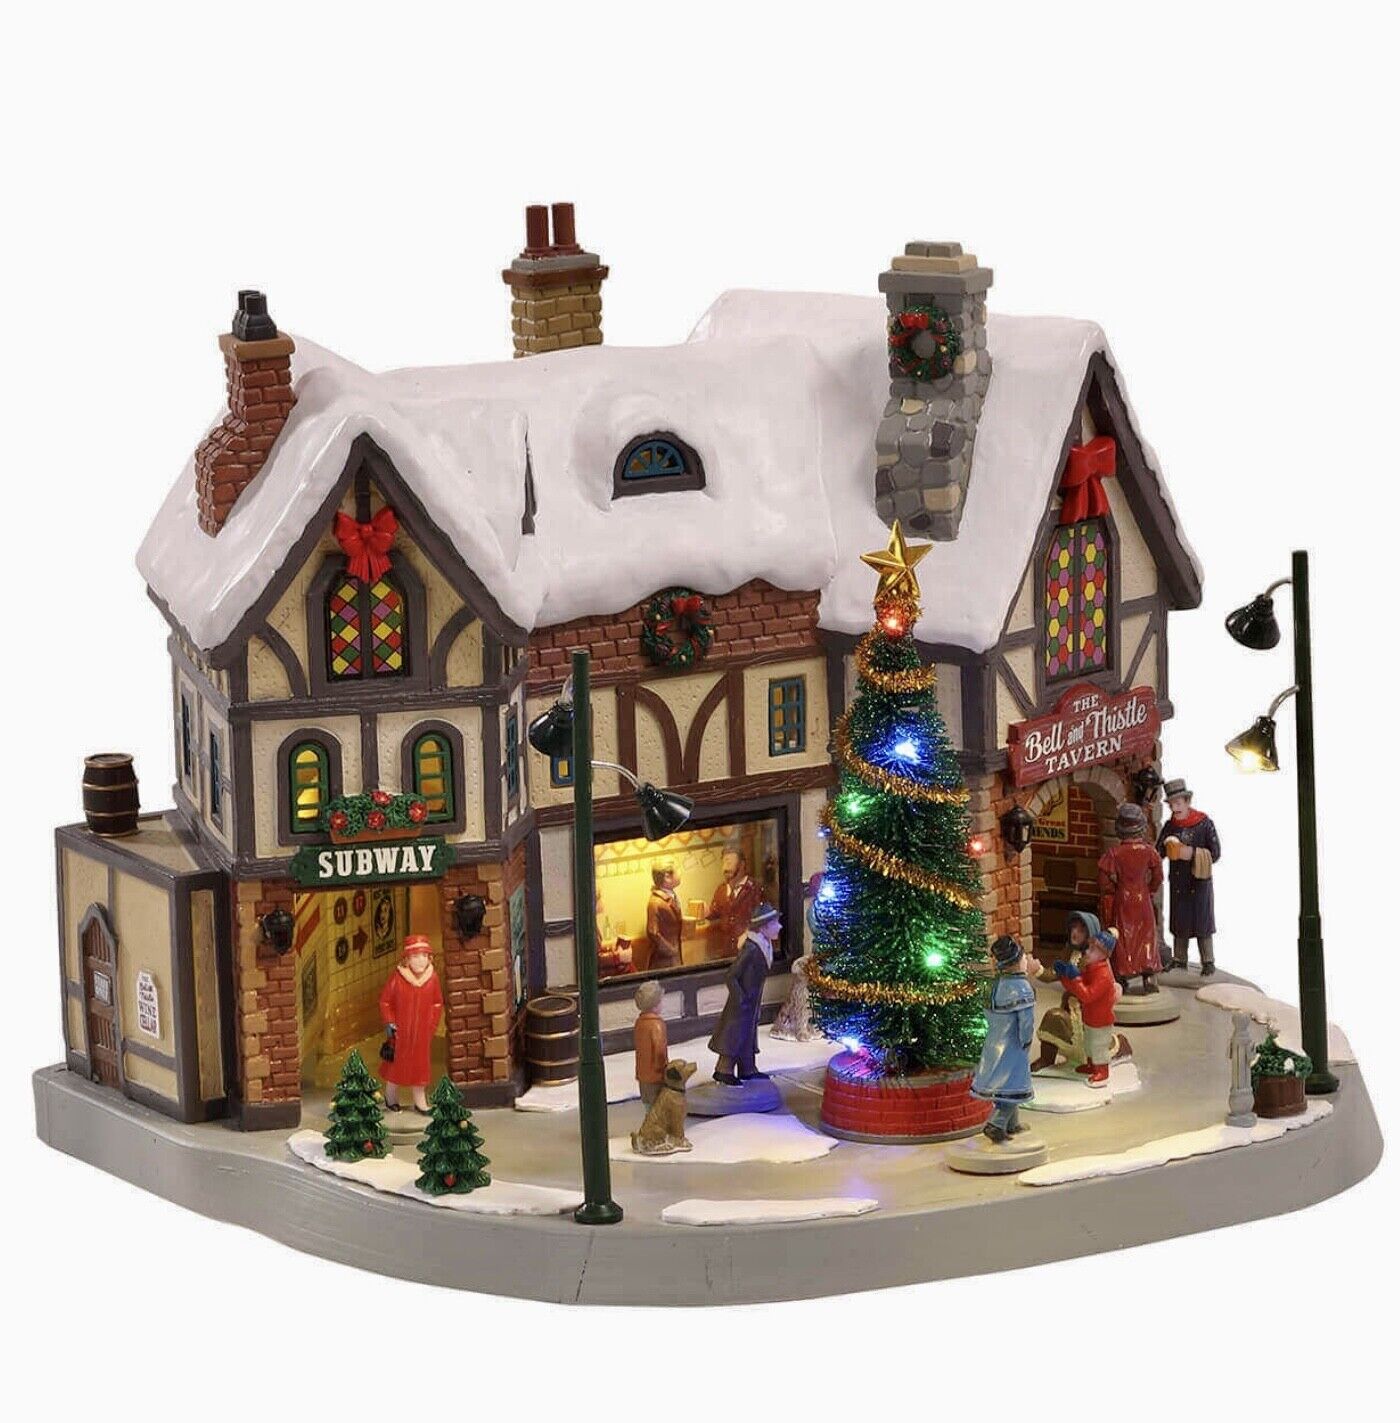 Lemax The Bell & Thistle Tavern #05682 Sights Sounds Animation BNIB